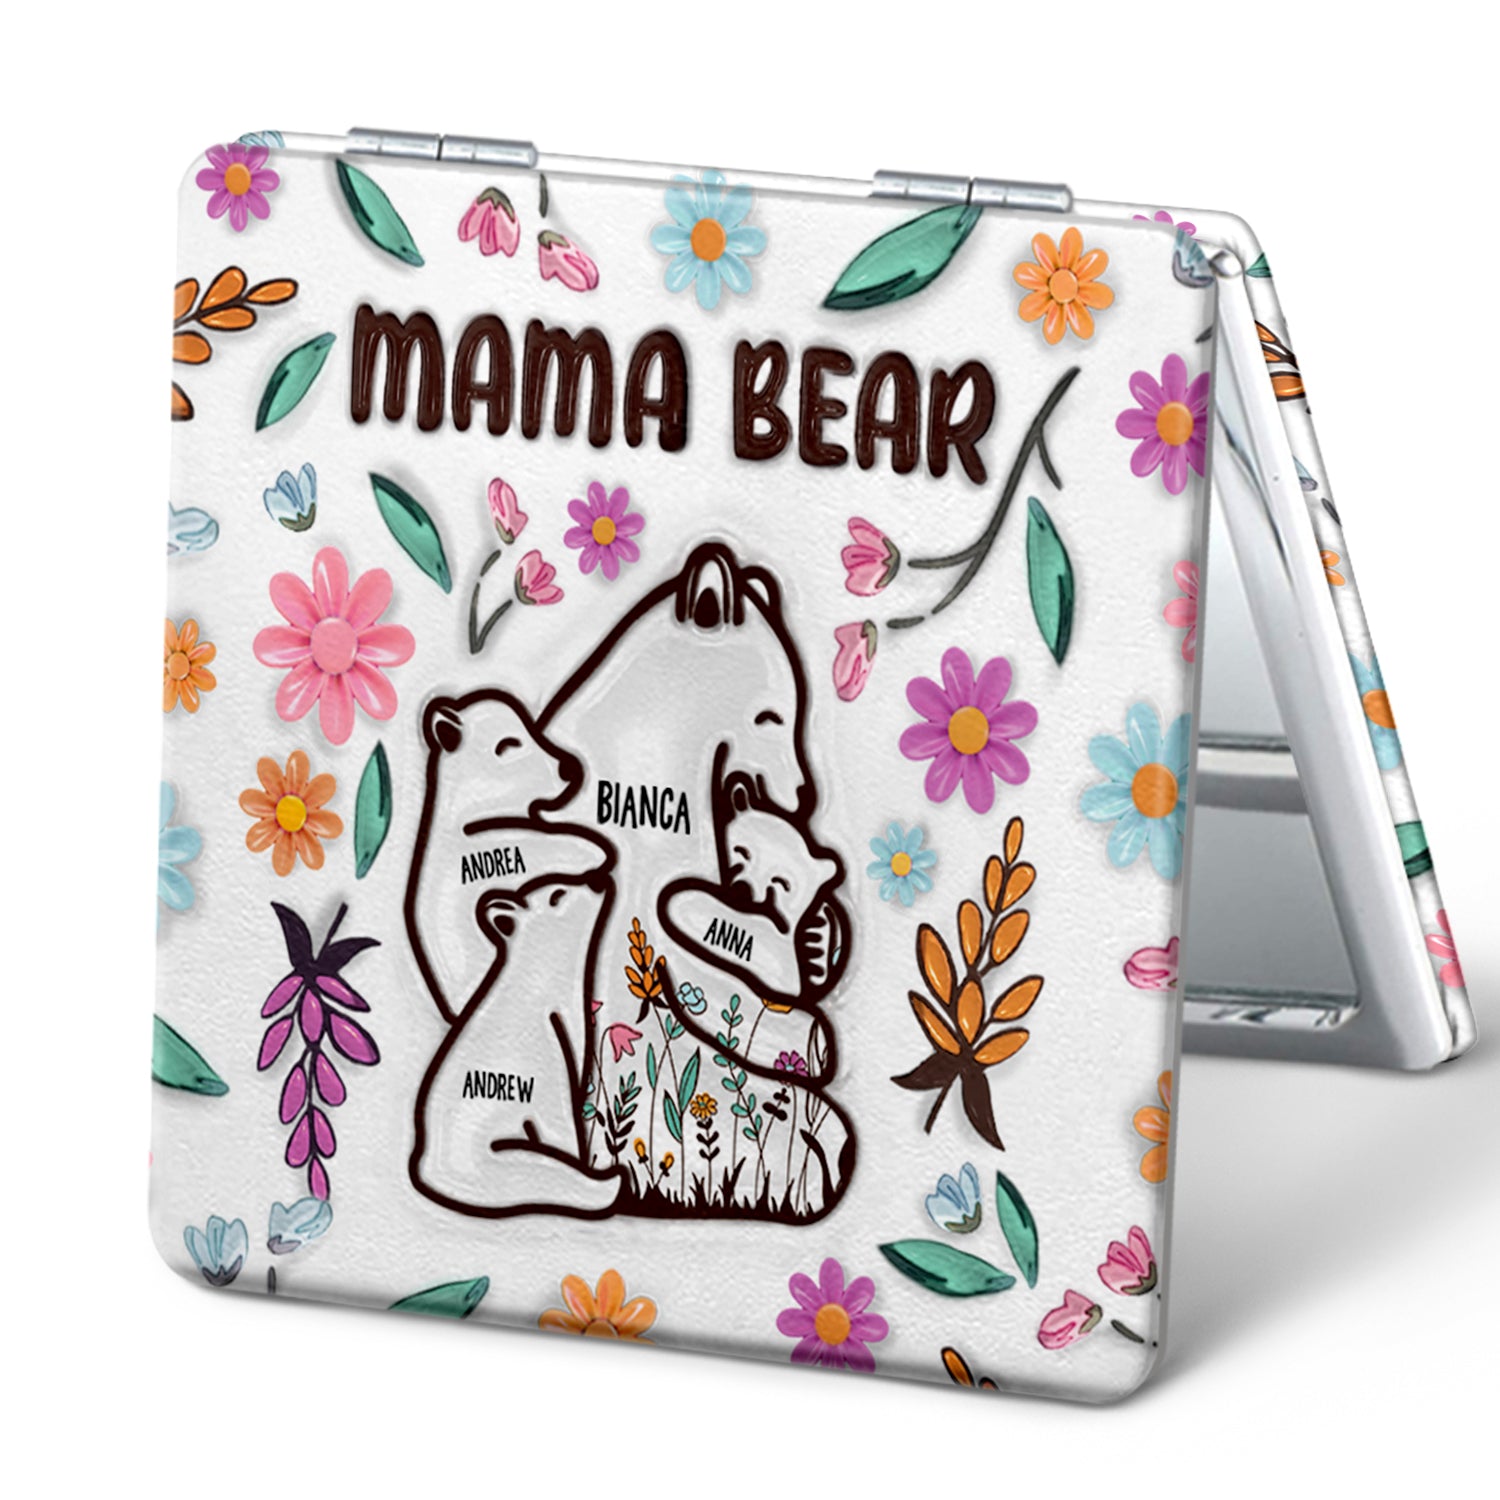 Mama Bear Floral Style - Birthday, Loving Gift For Mom, Mother, Grandma, Grandmother - 3D Inflated Effect Printed Mirror, Personalized Square Compact Mirror